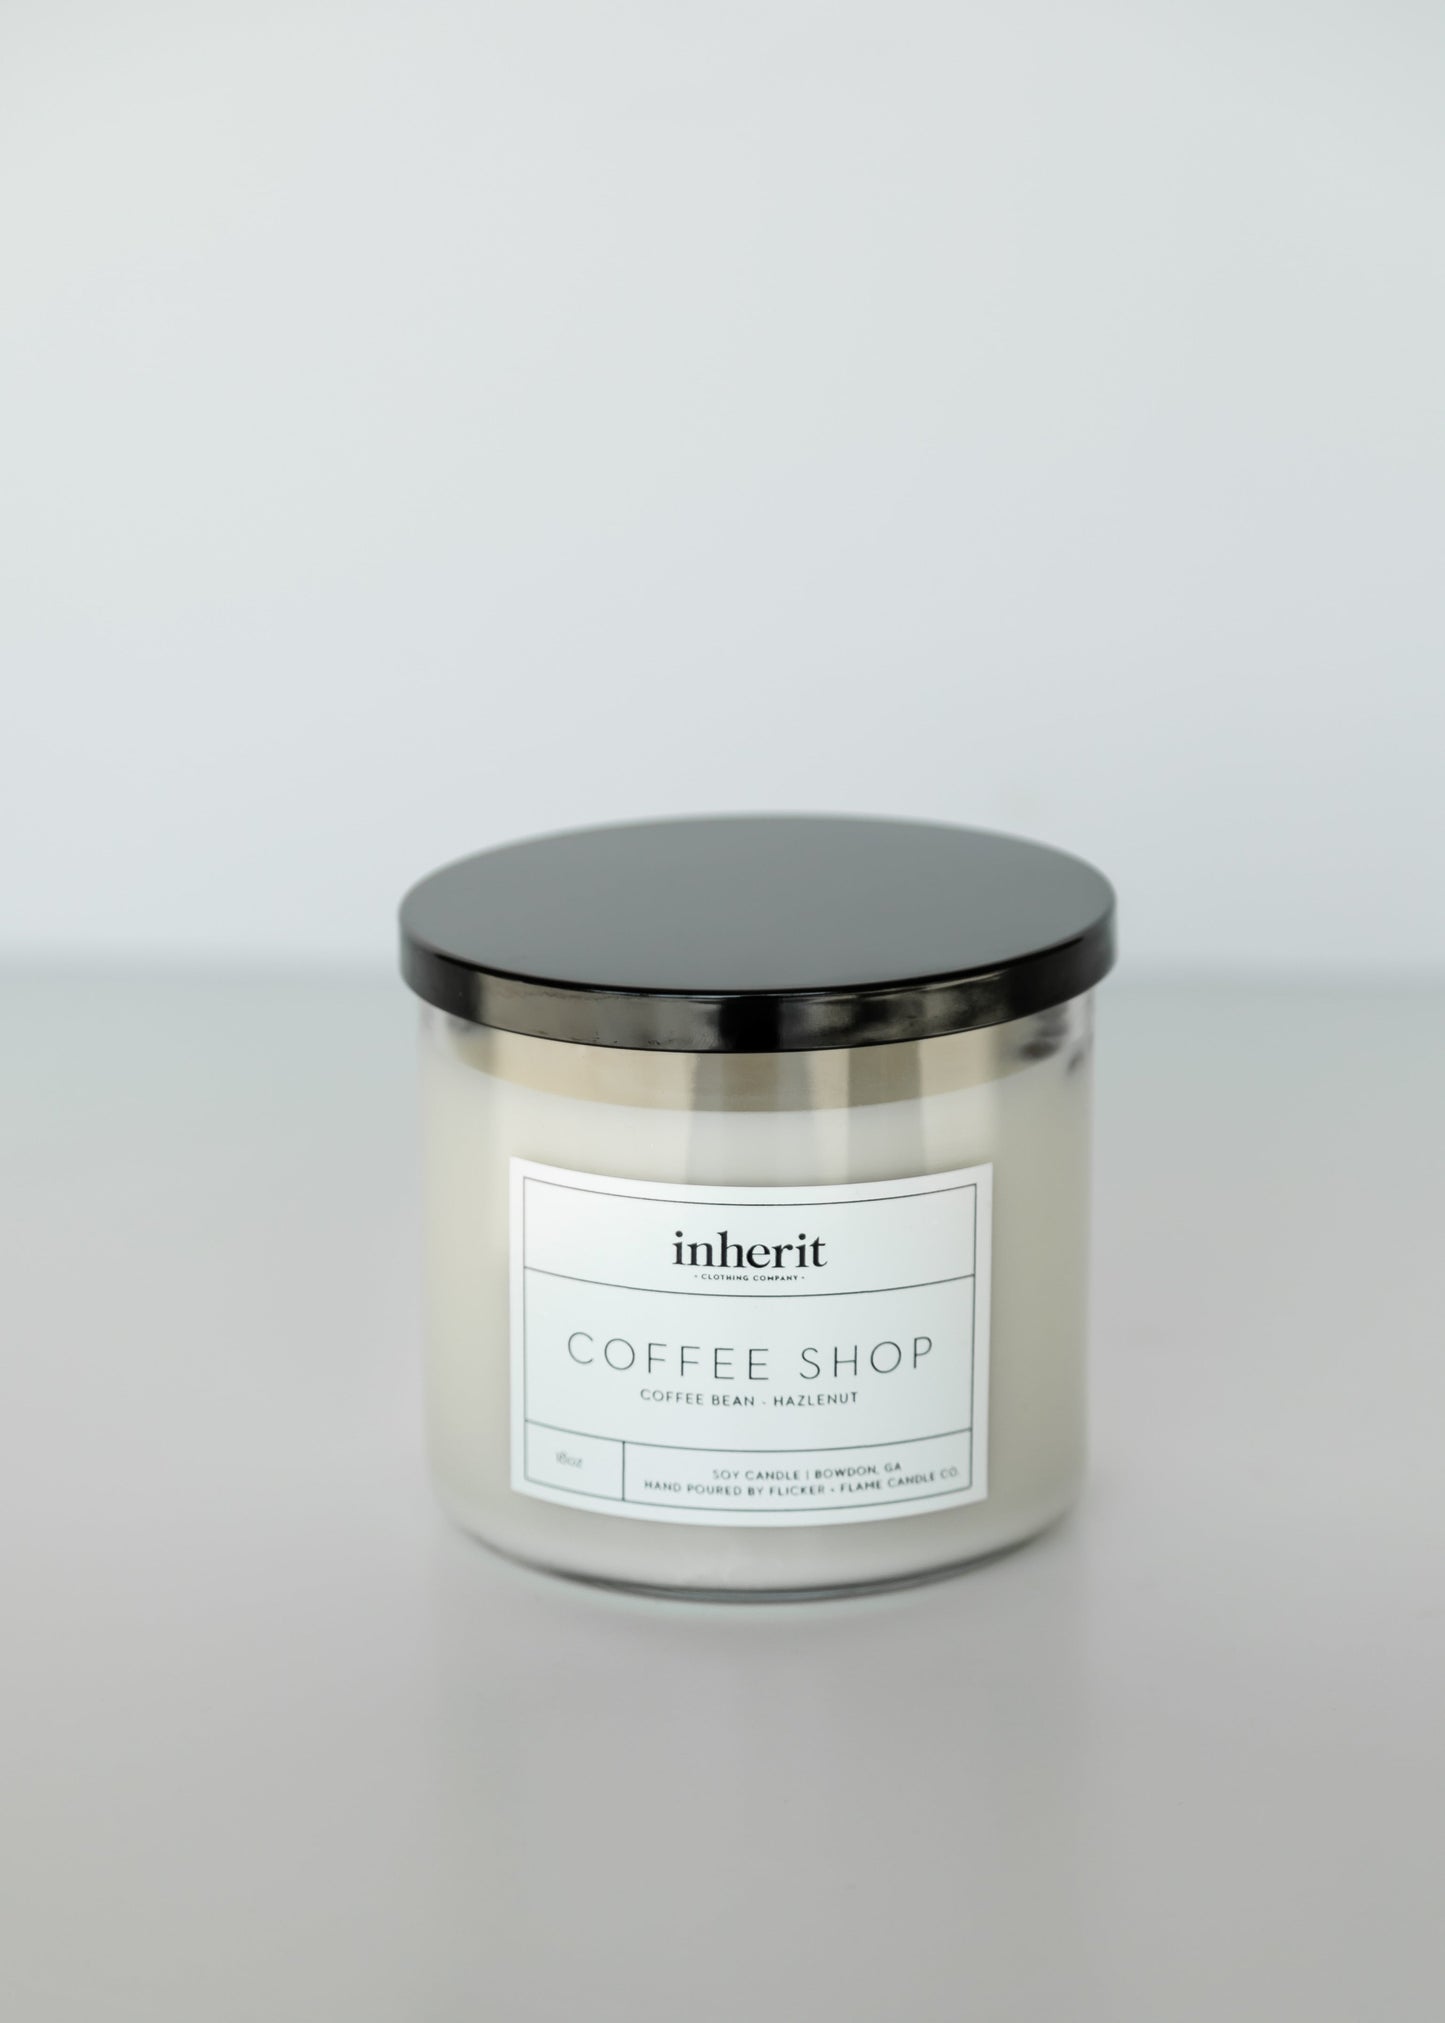 Inherit Ethereal Scented Soy Candle 18oz Gifts Coffee Shop